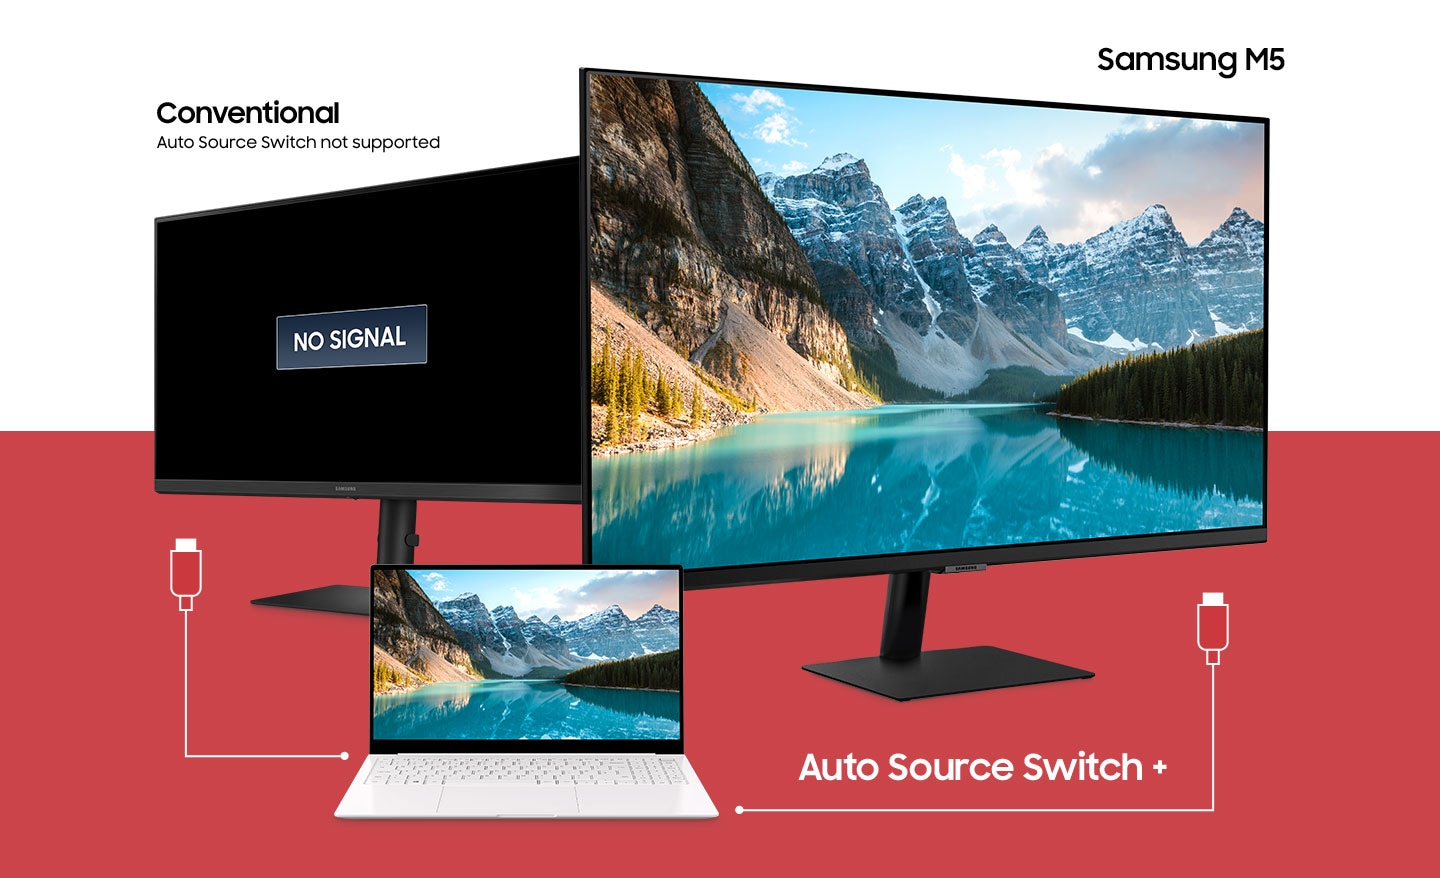 A laptop sits in between two monitors. The laptop has two different cables attempting to connect to the monitors. Above the left monitor, the text †Conventional, Auto Source Switch not supported' appears and a †No Signal' icon appears on the screen. Above the right monitor shows the text †Samsung M7' and a mountainous scene appears on the screen due to the Auto Source Switch+ functionality.